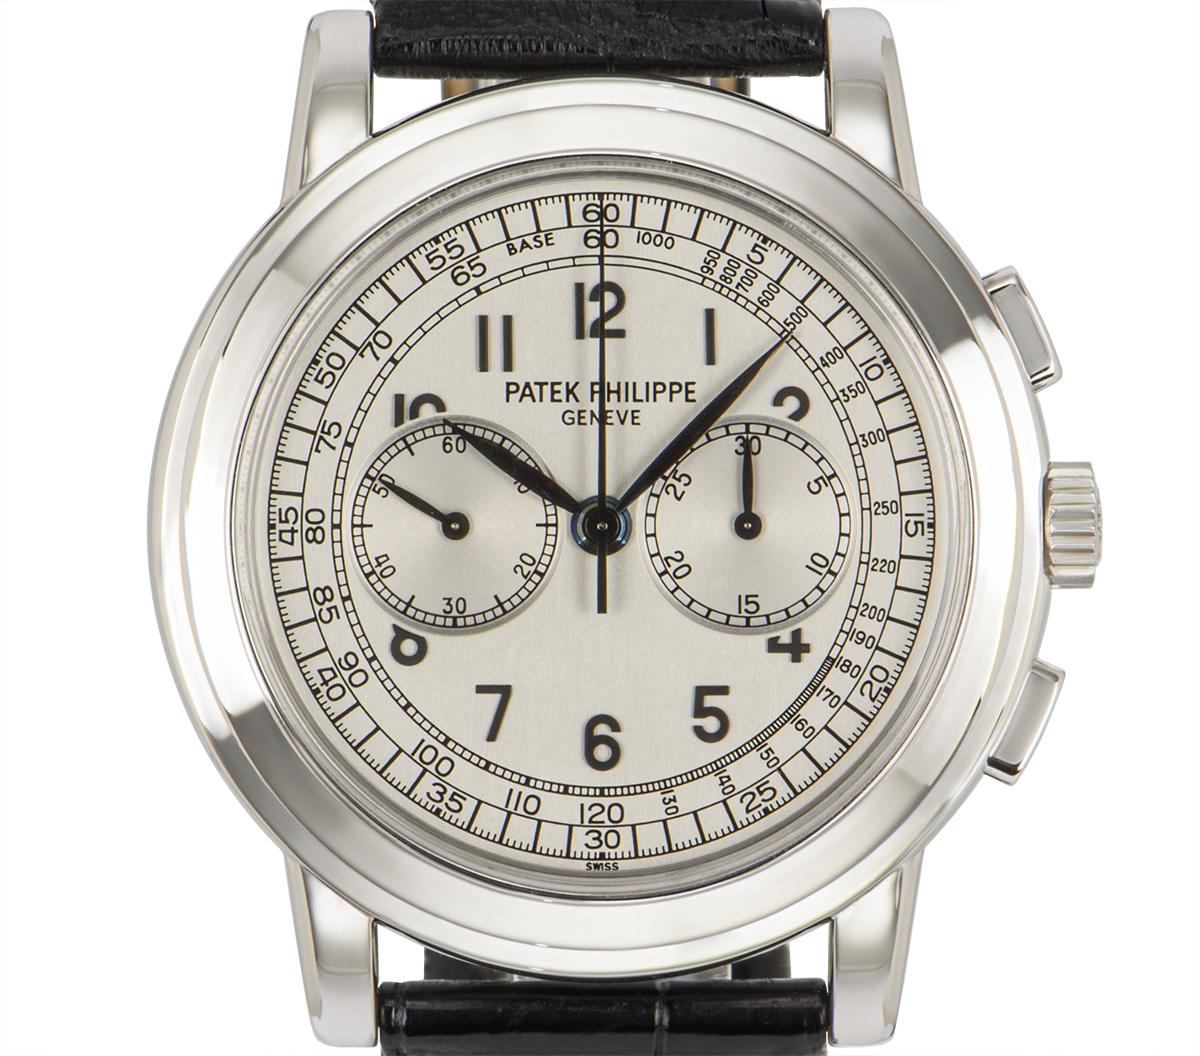 A 42 mm Complications Chronograph by Patek Philippe in white gold, featuring a silver dial. The dial features a 30 minute counter, a small seconds display and tachymetre. An original black leather strap comes with an original white gold deployant